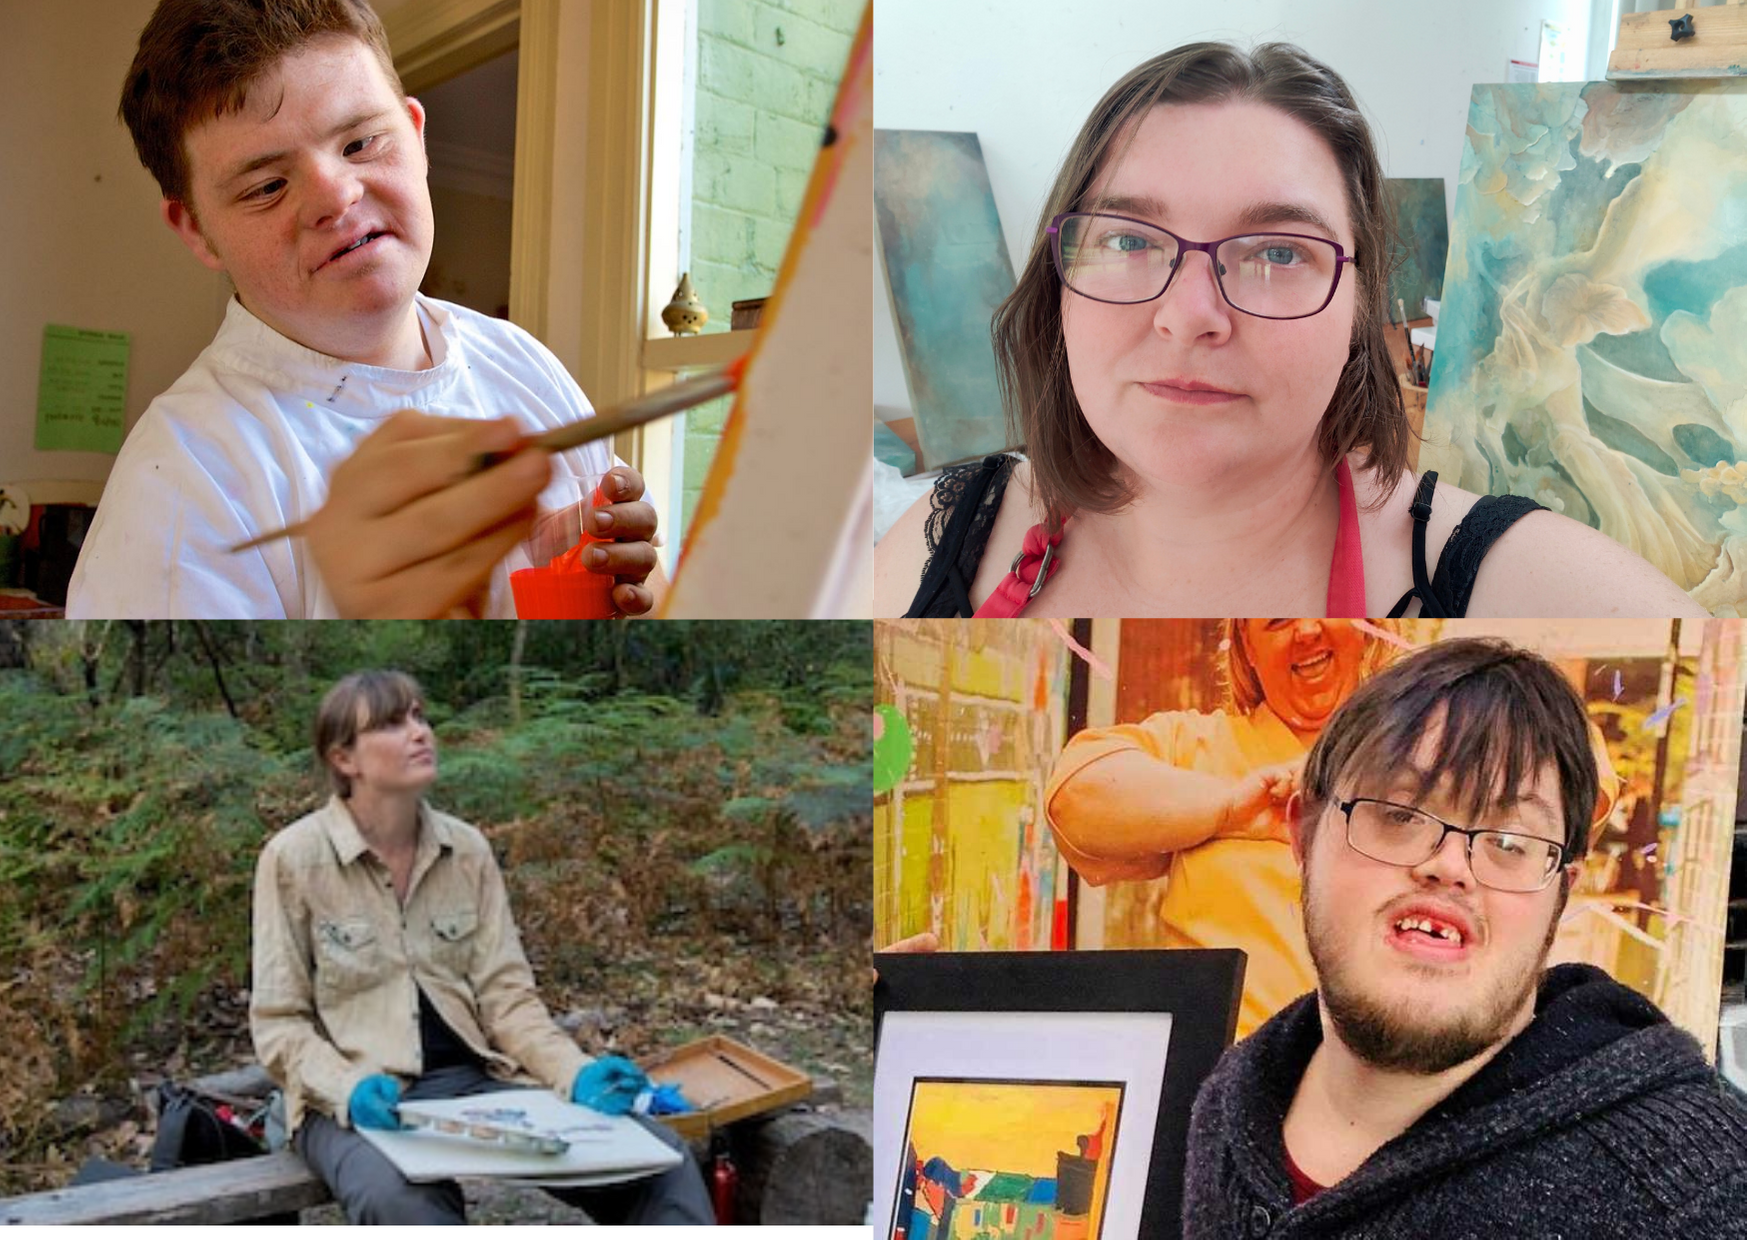 A composite image of four artists with artworks they are painting or have painted.